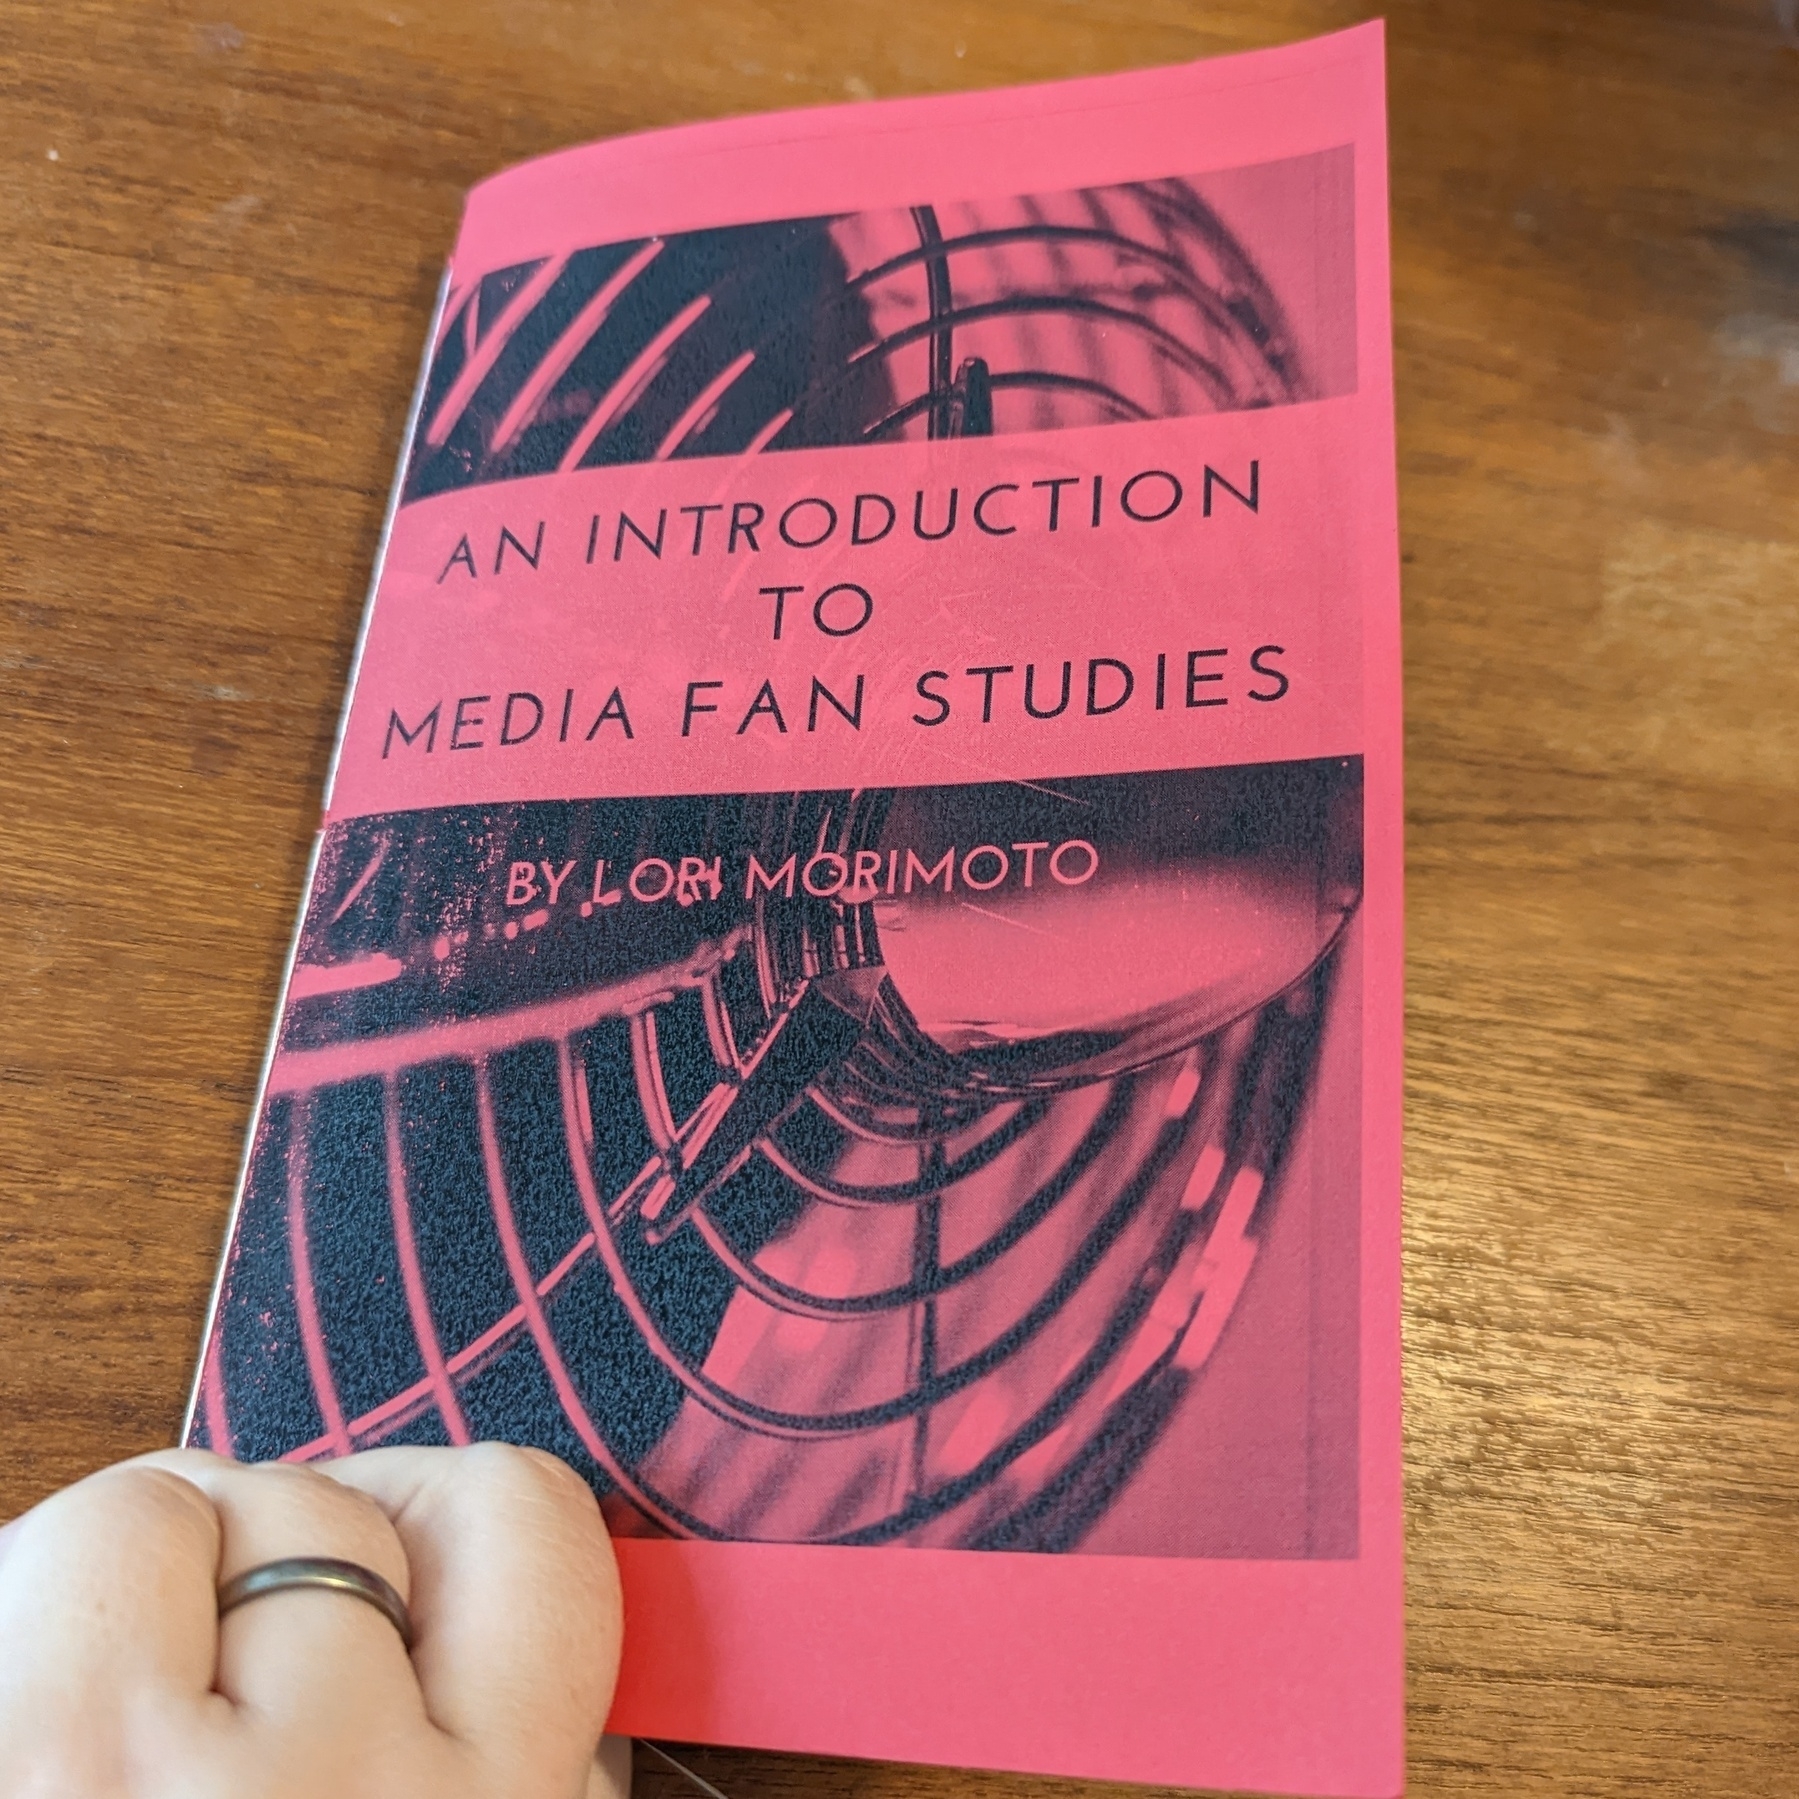 A zine-style book of Lori Morimoto's An Introduction to Media Fan Studies.